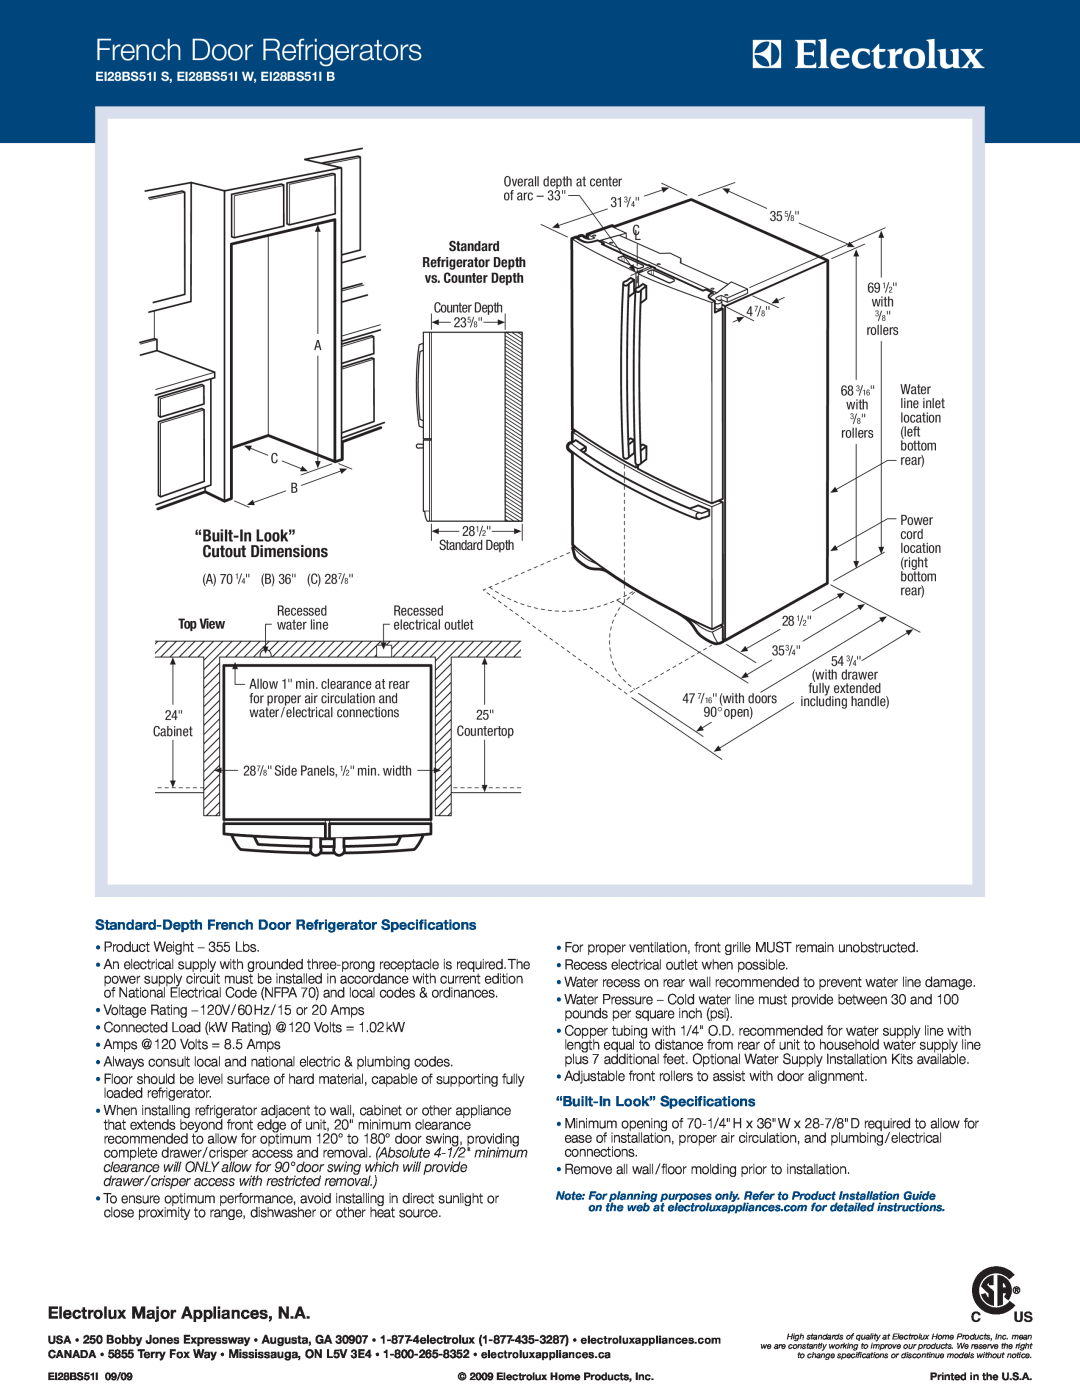 Electrolux EI28BS51IS Standard-Depth French Door Refrigerator Specifications, “Built-In Look” Specifications, Top View 